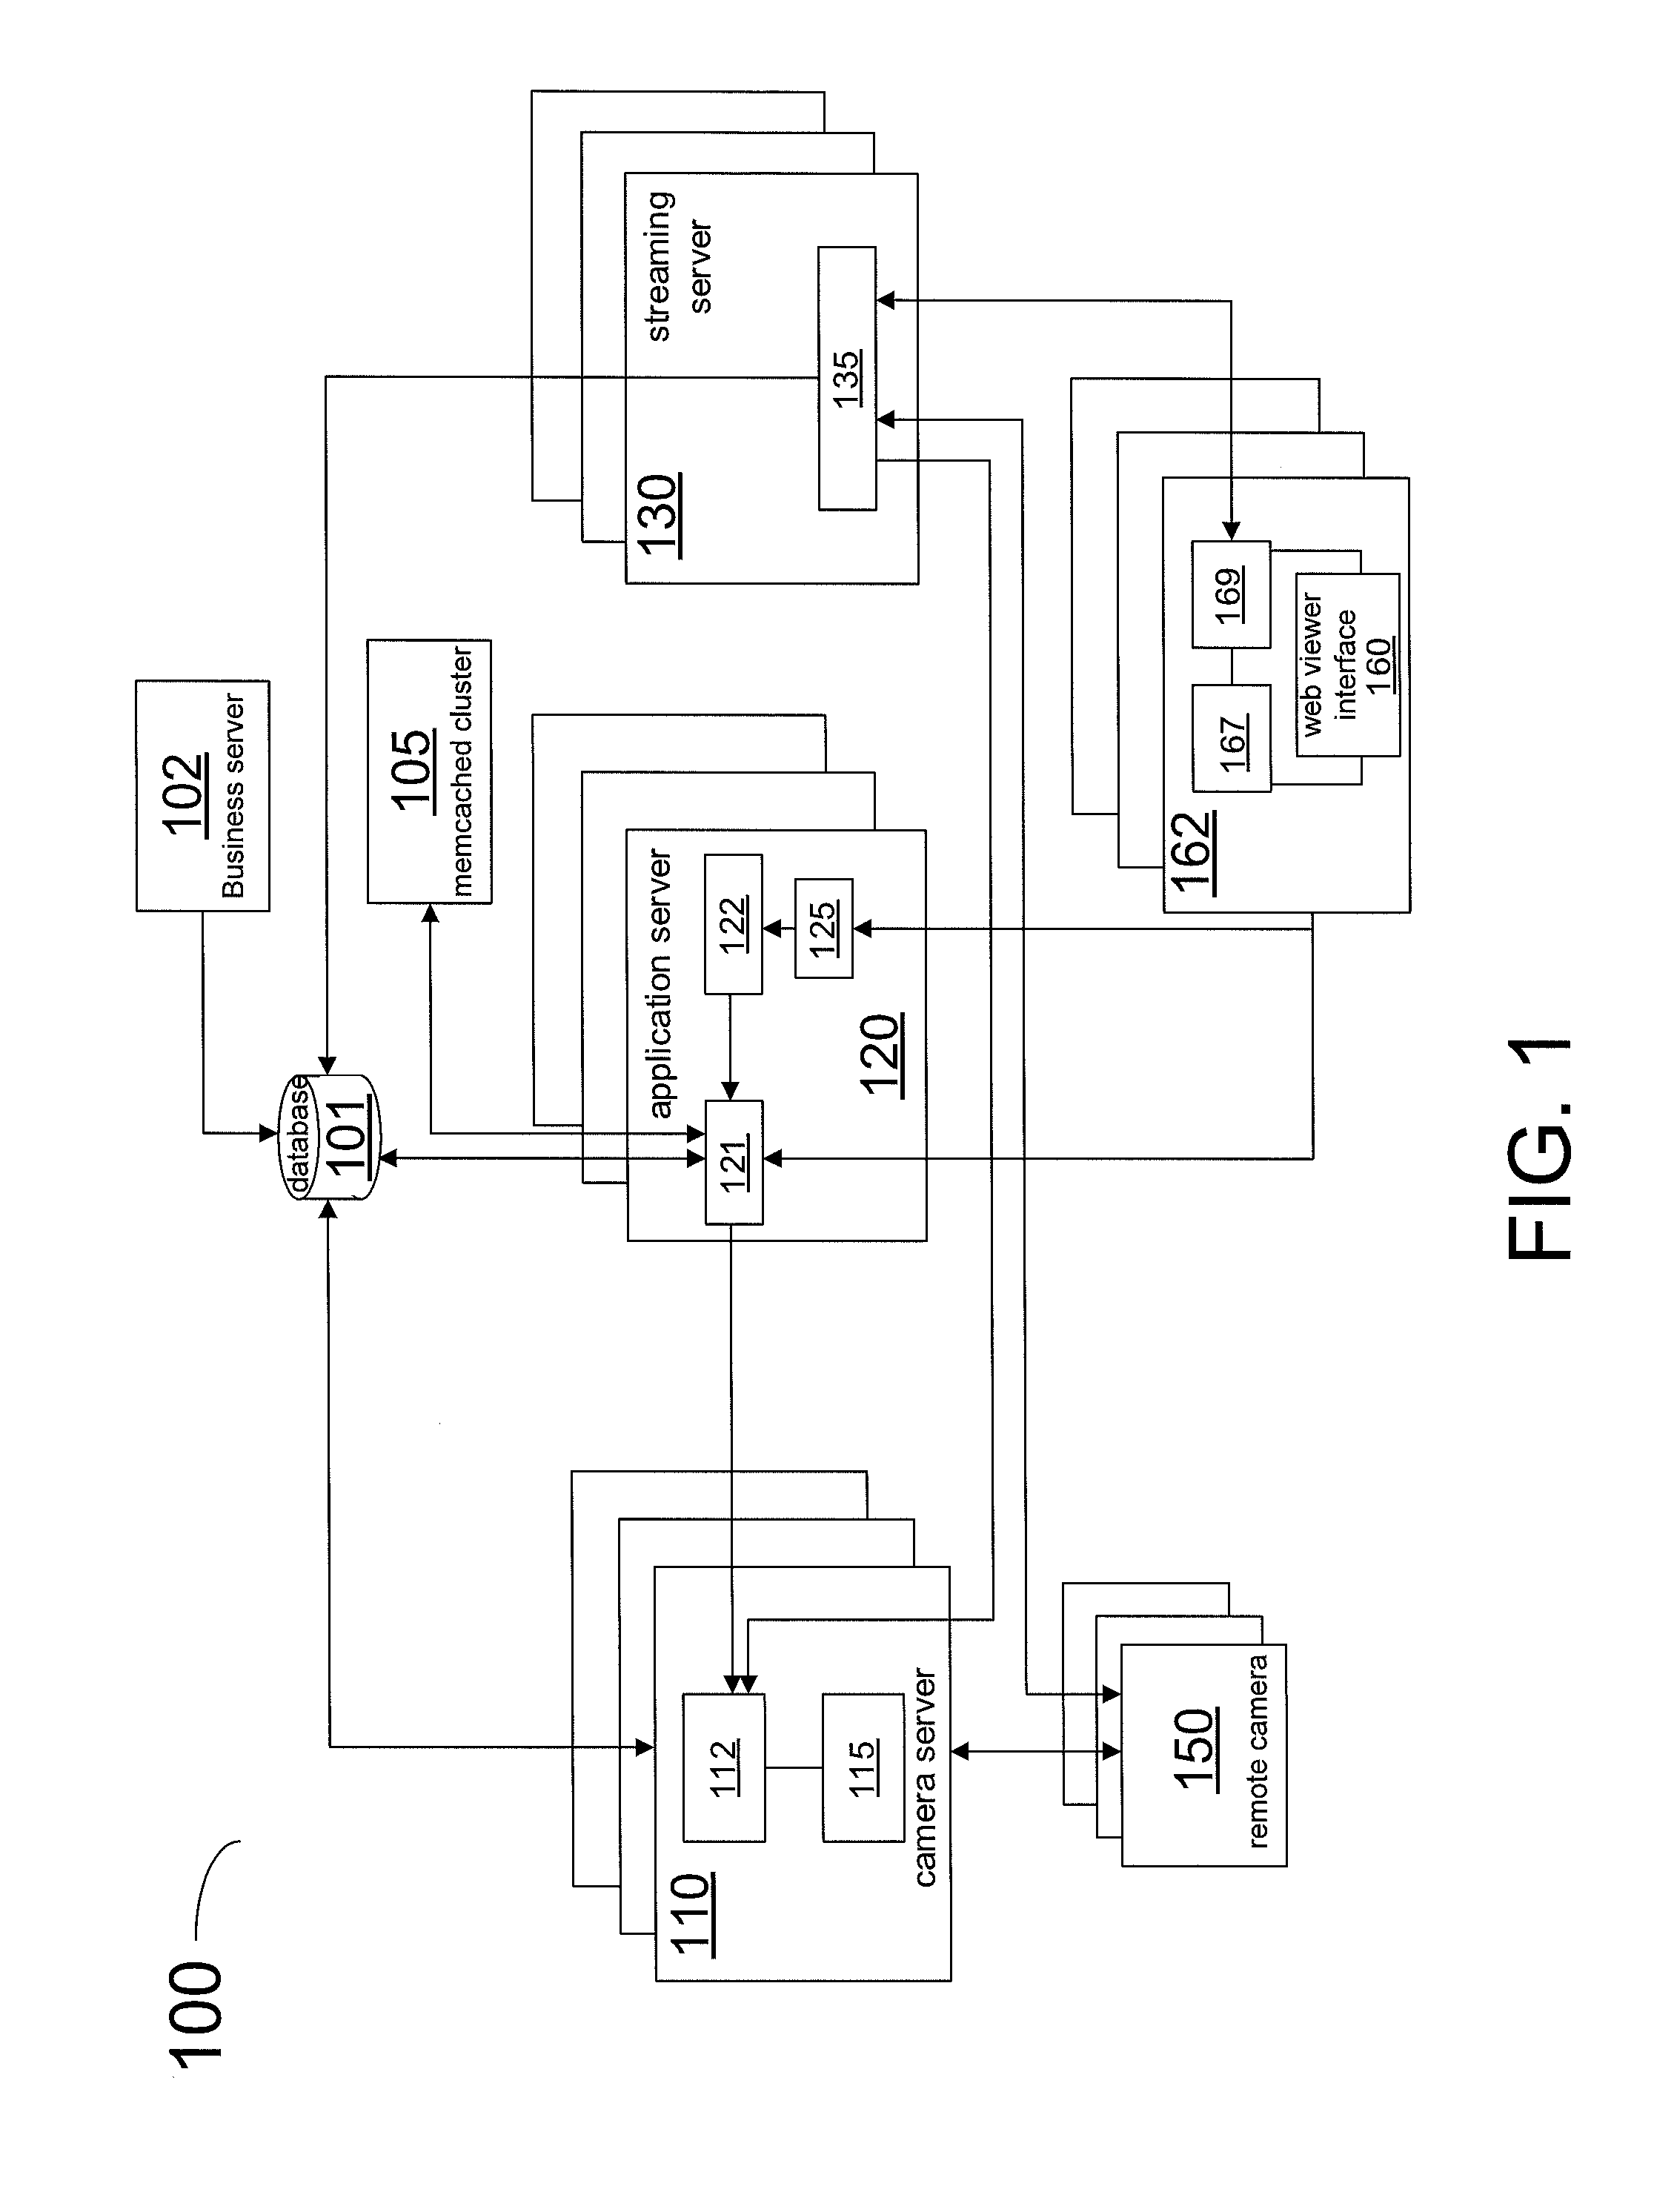 Method and system for an advanced player in a network of multiple live video sources